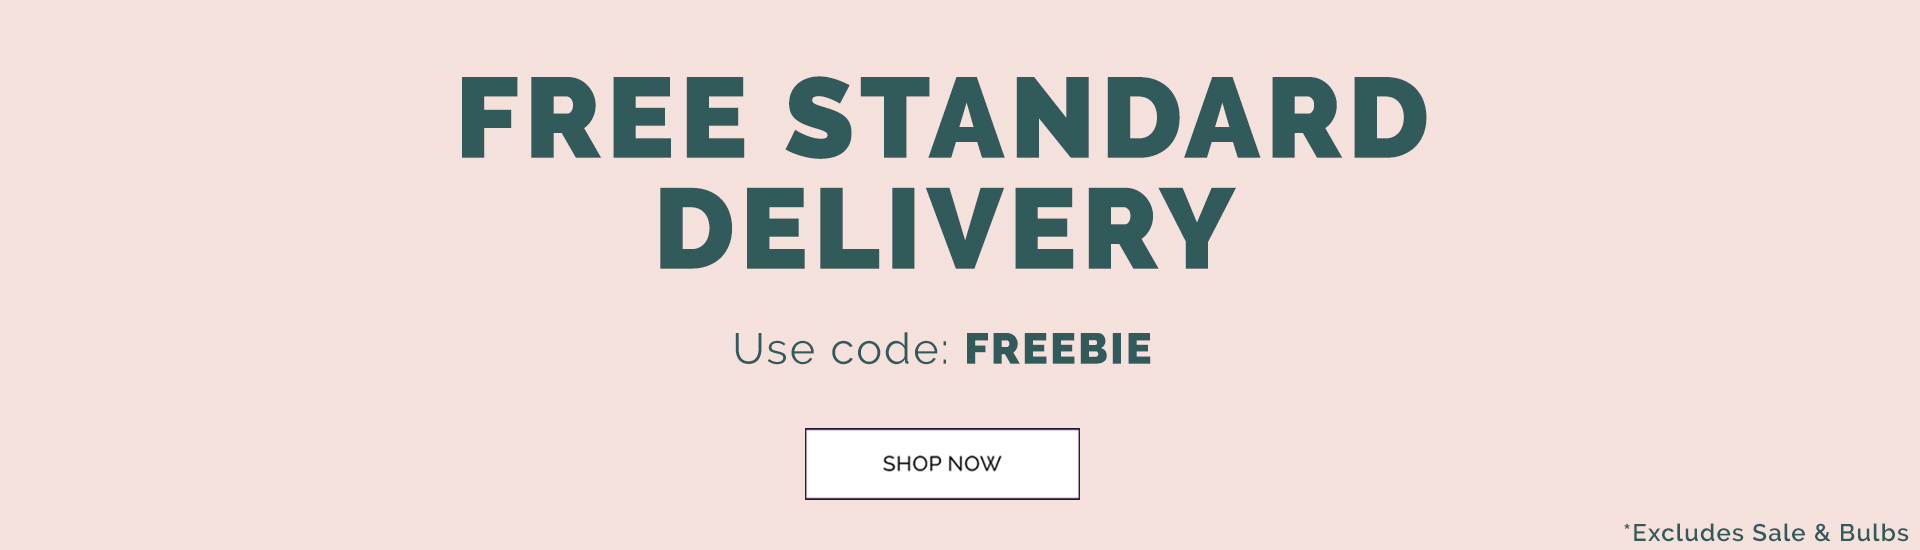 Free Standard Delivery | Use Code: FREEBIE | Shop Now